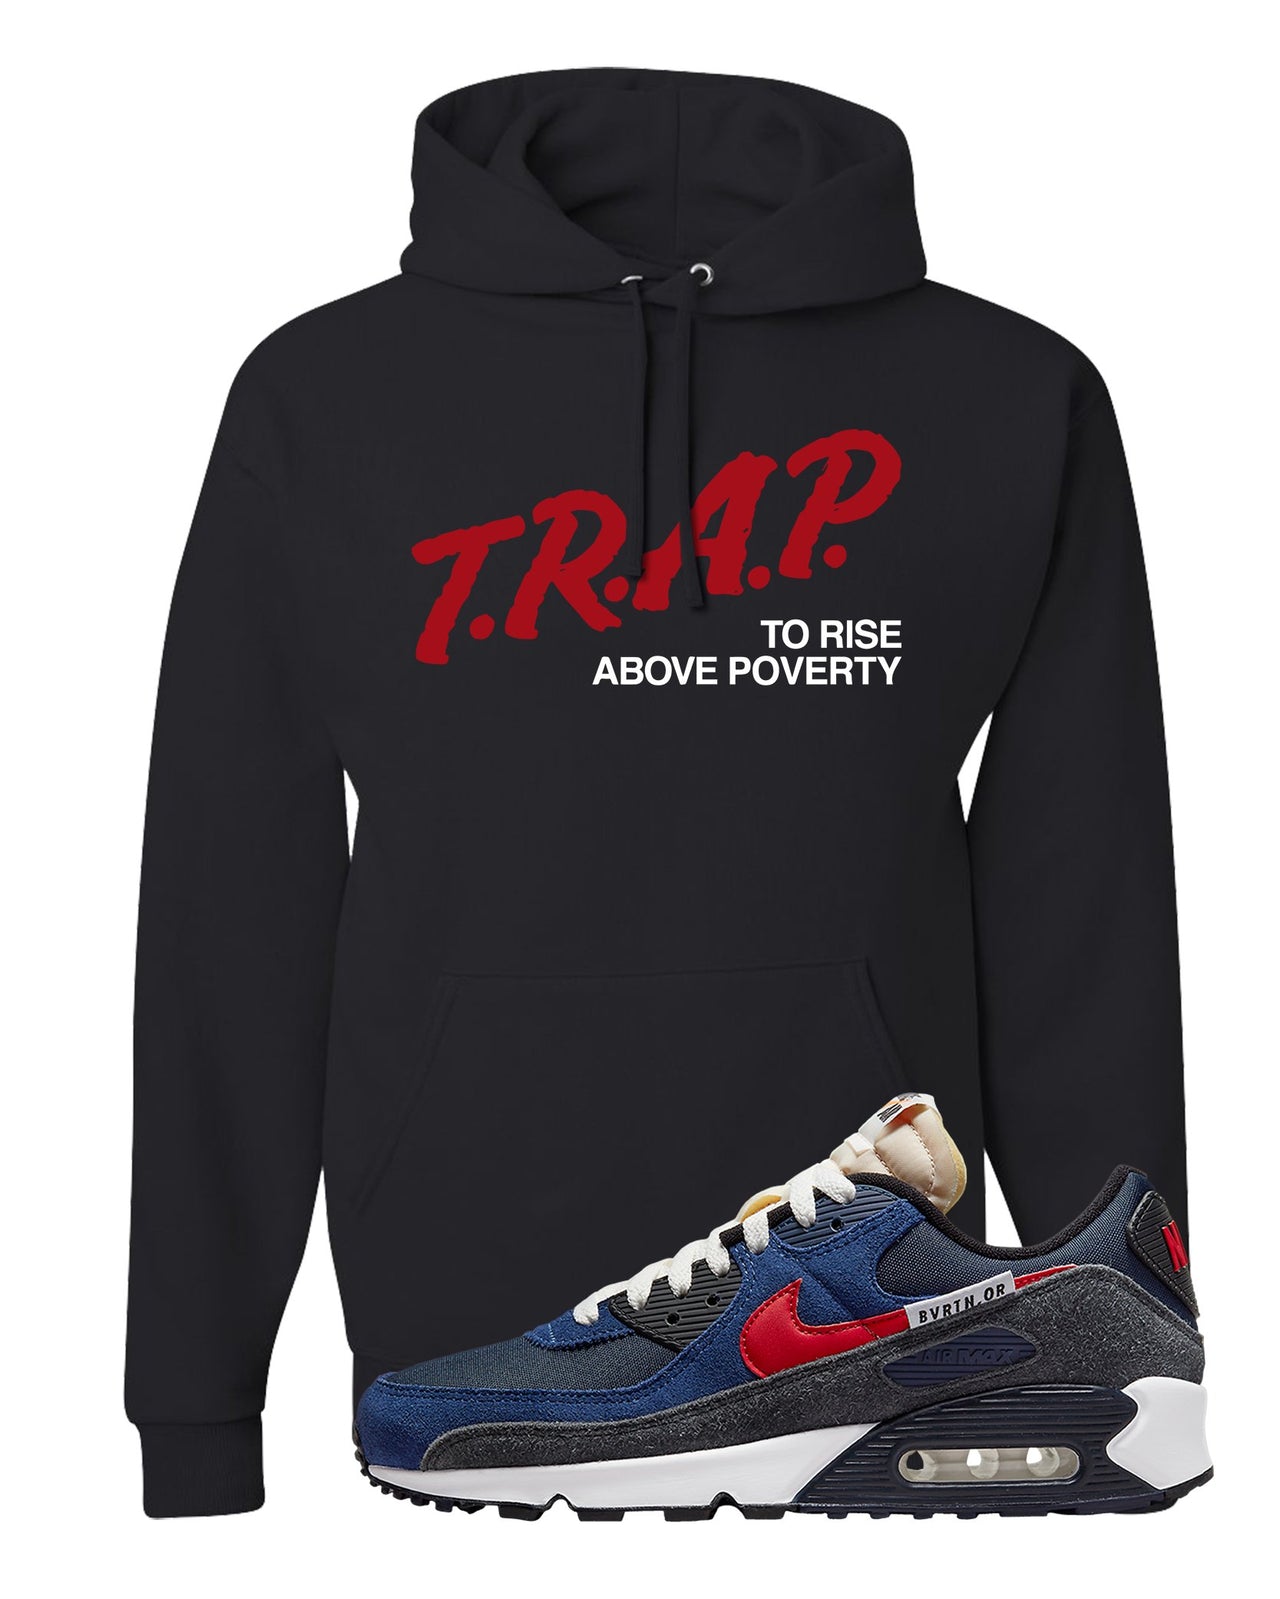 AMRC 90s Hoodie | Trap To Rise Above Poverty, Black